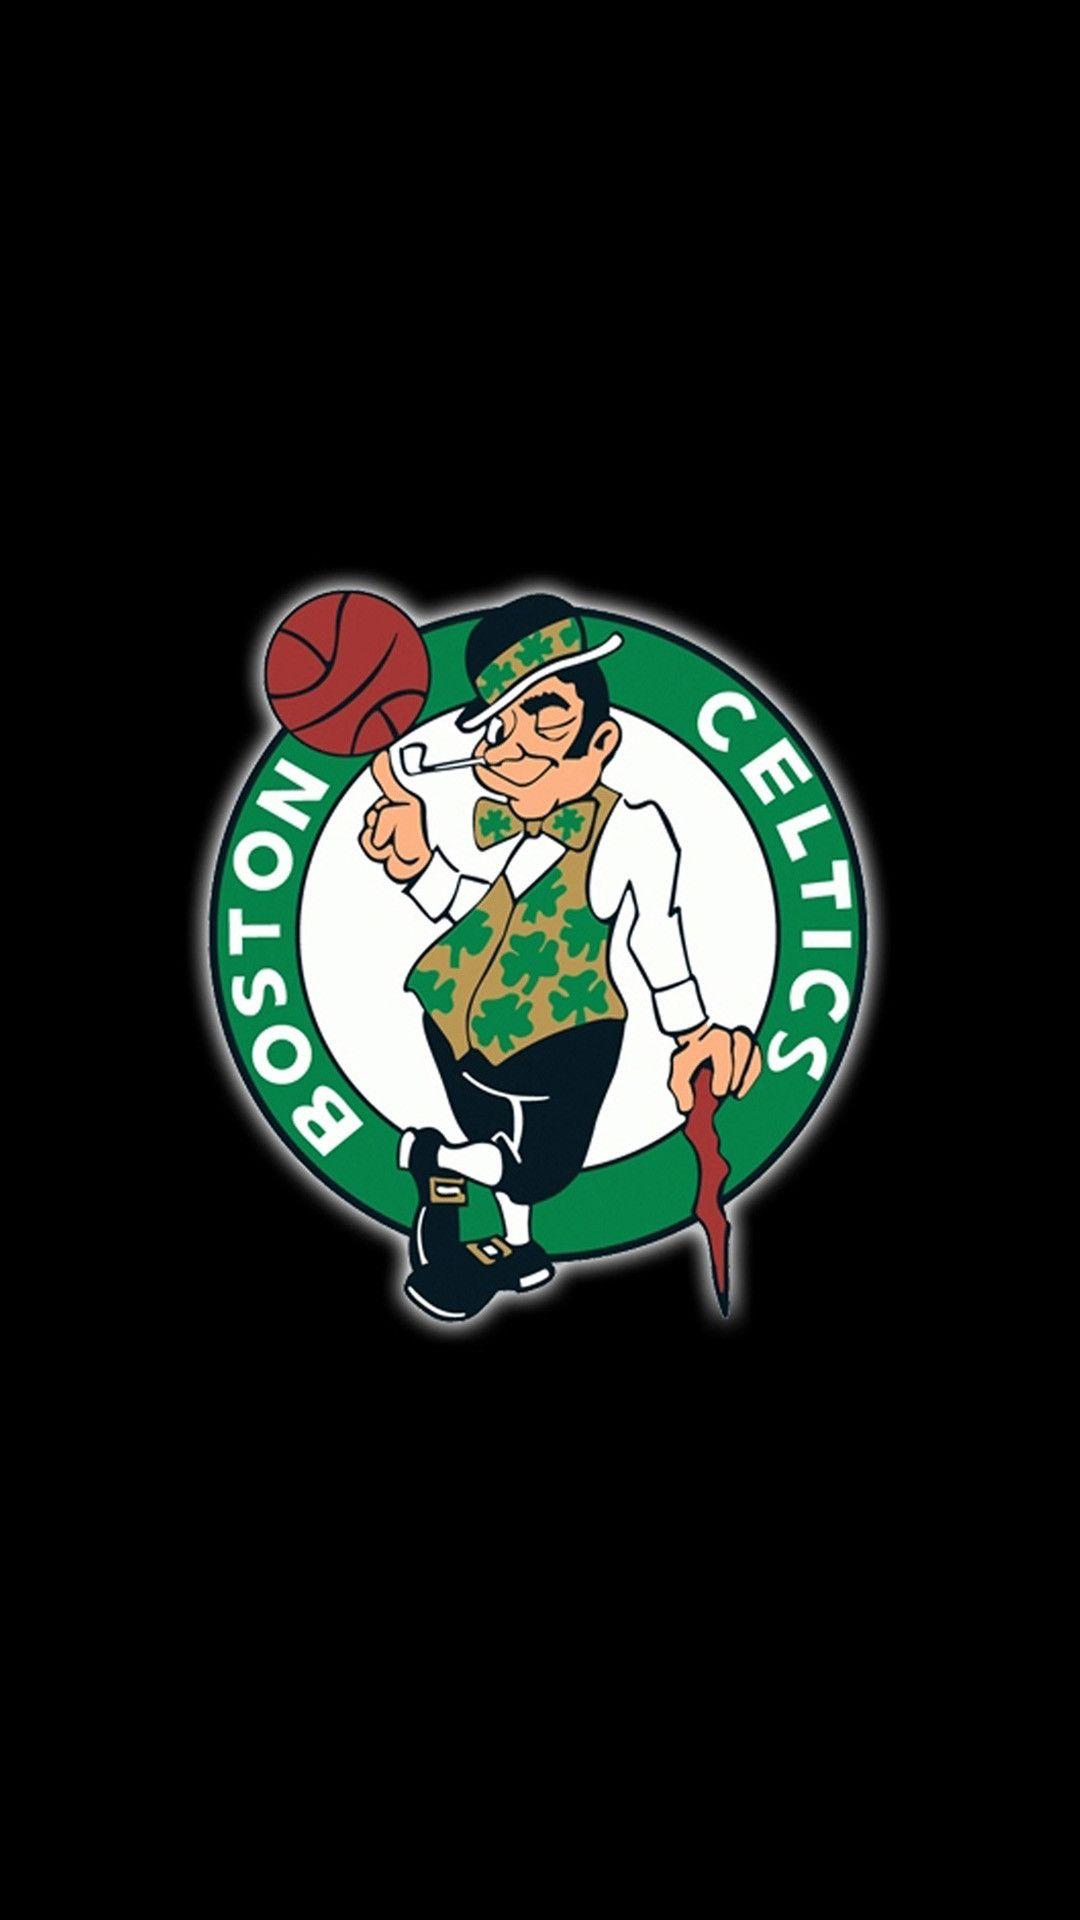 Cool iPhone wallpaper I wanted to share with u guys  rbostonceltics